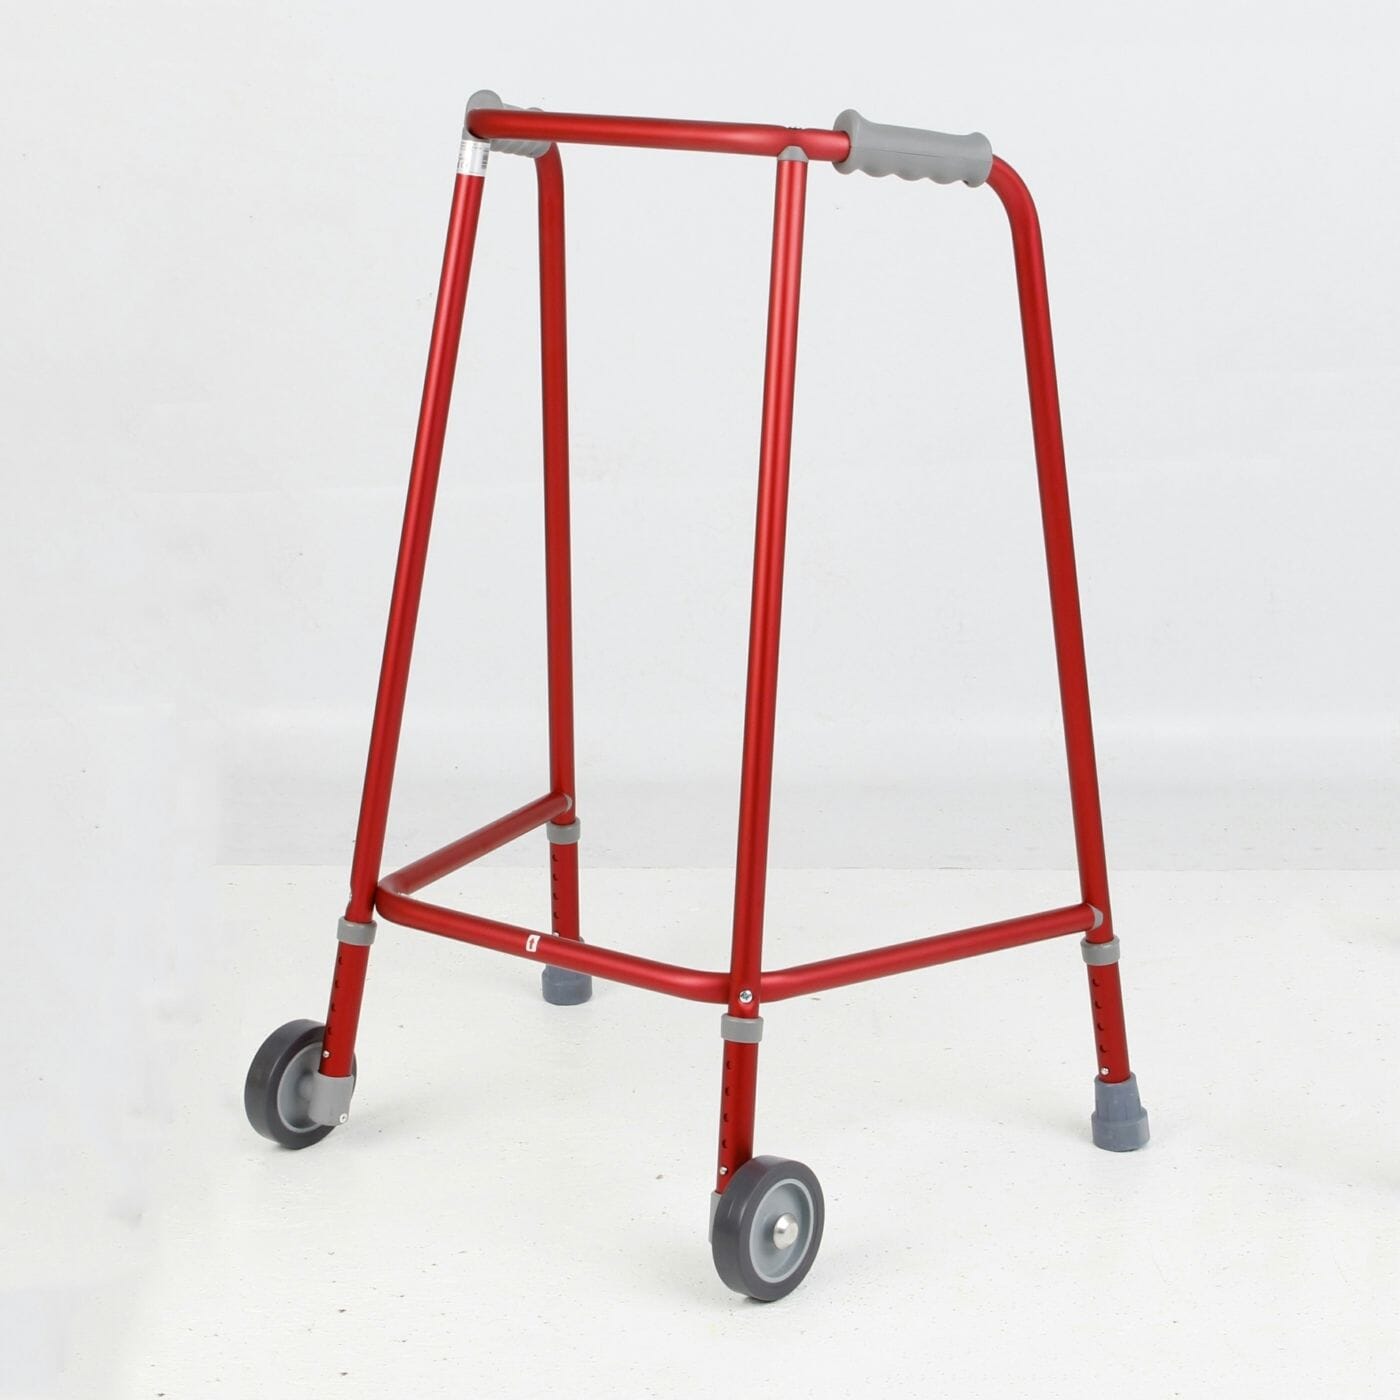 View Days Red Wheeled Walking Frames Adjustable Height Standard Large 35123812  information